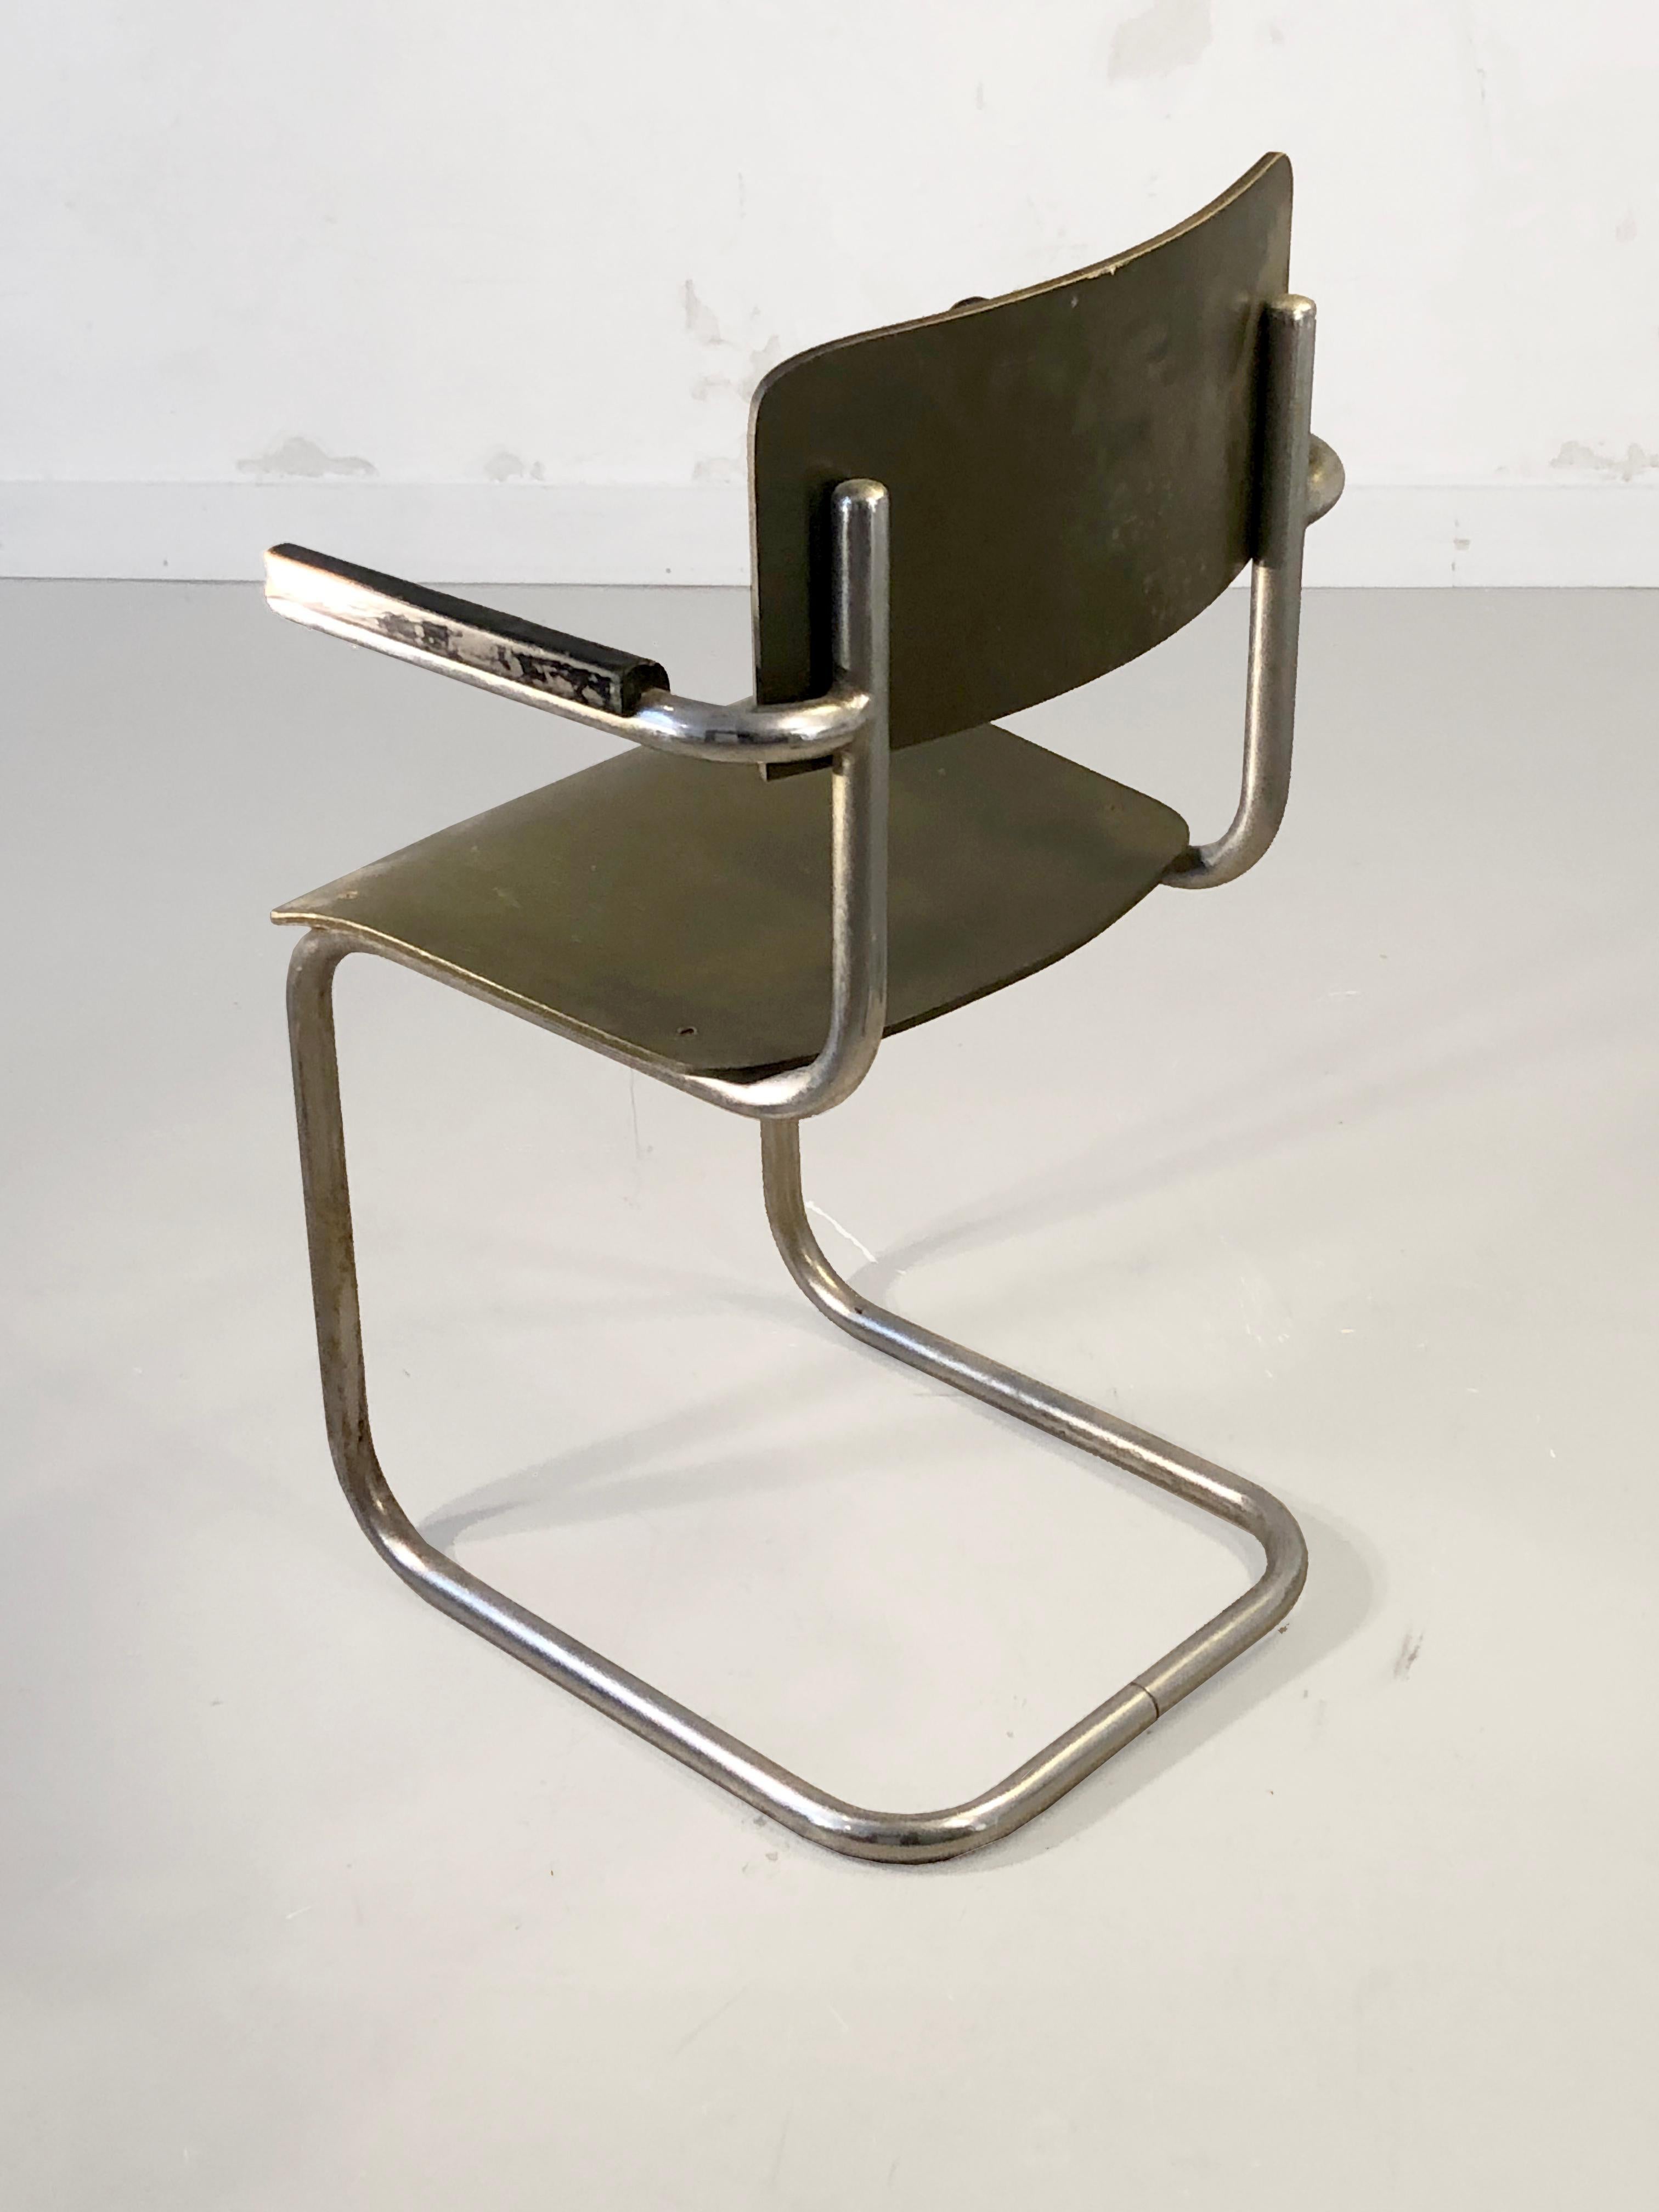 An Early MODERNIST BAUHAUS CHAIR by MART STAM for MAUSER WERKE, Germany 1930 For Sale 1